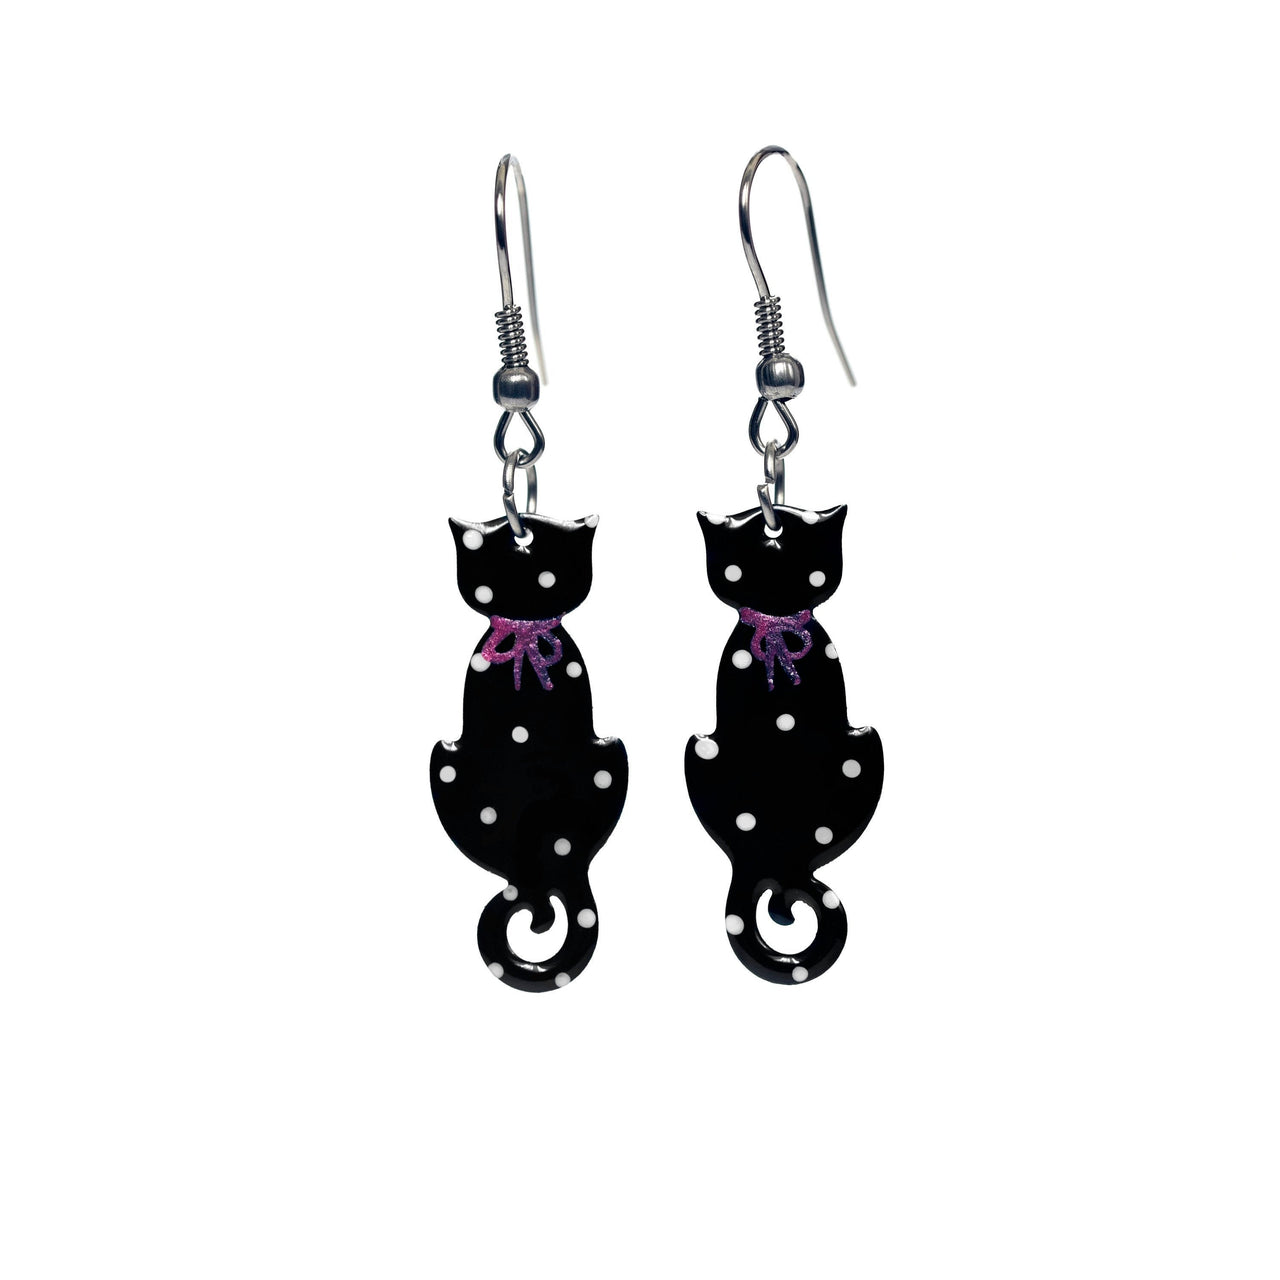 Black Cat Earrings with Polka Dots